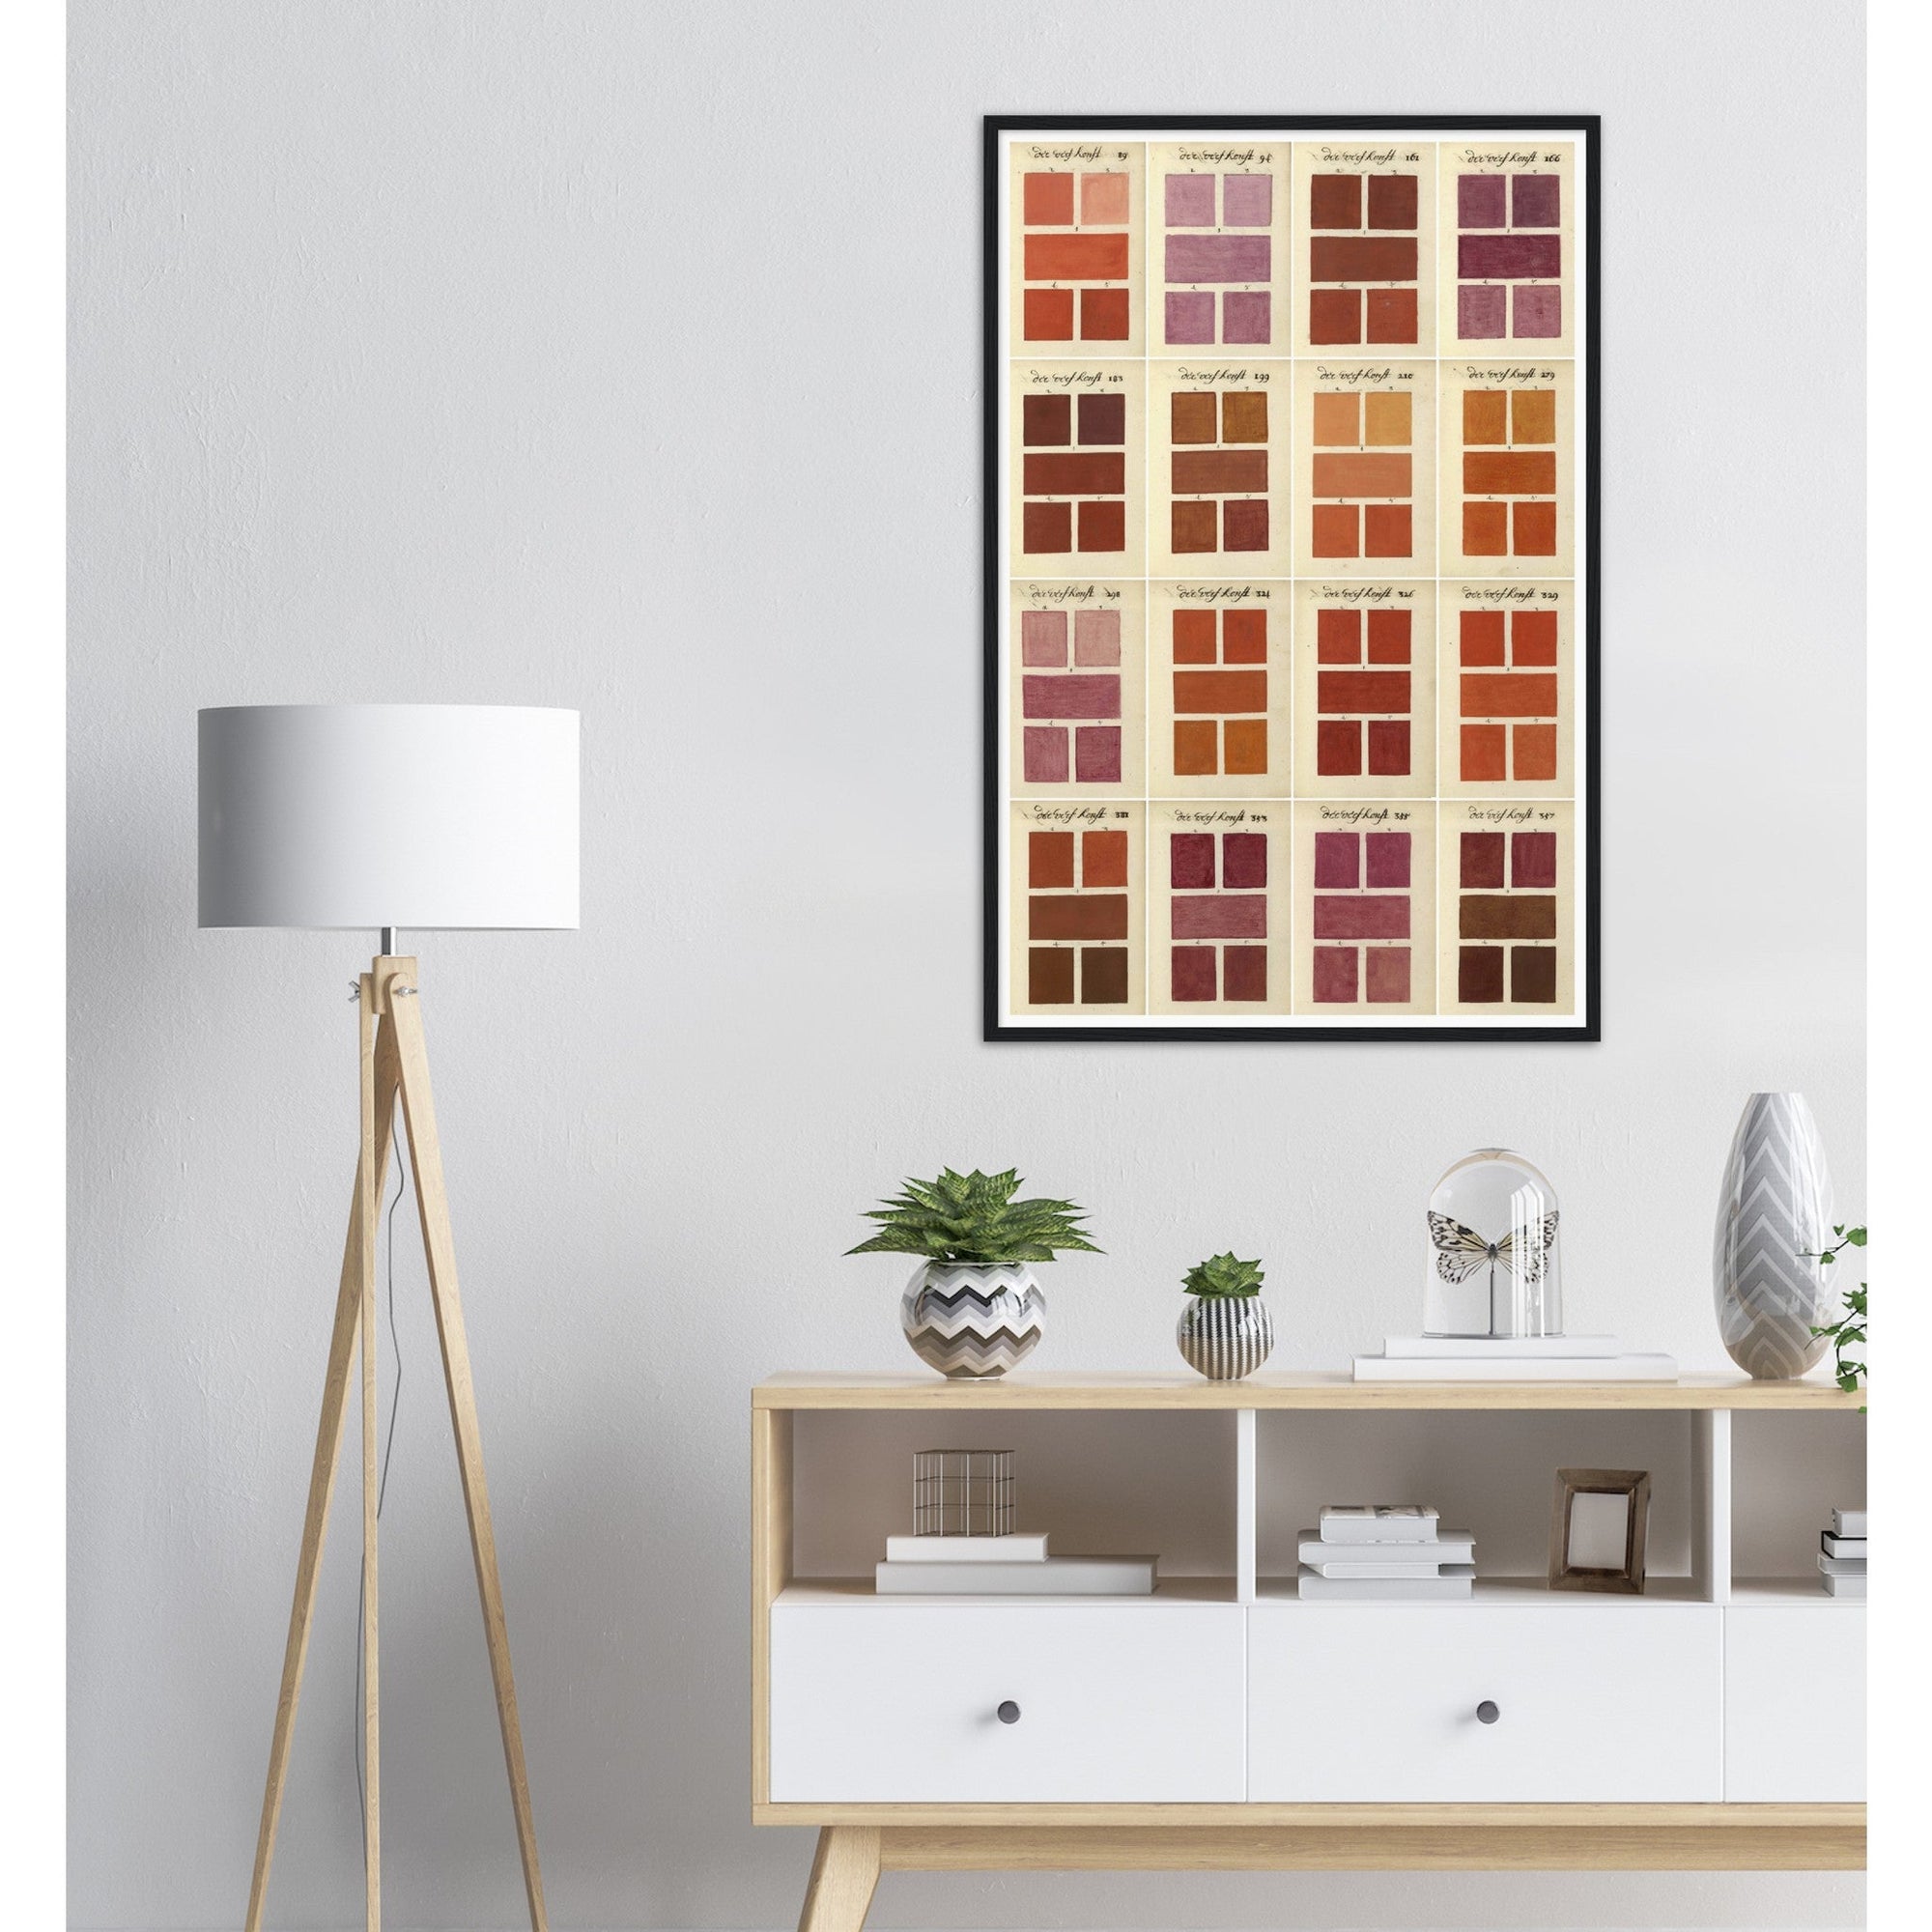 A. Boogert Red/Oranges color swatches in large art print framed on wall above shelf